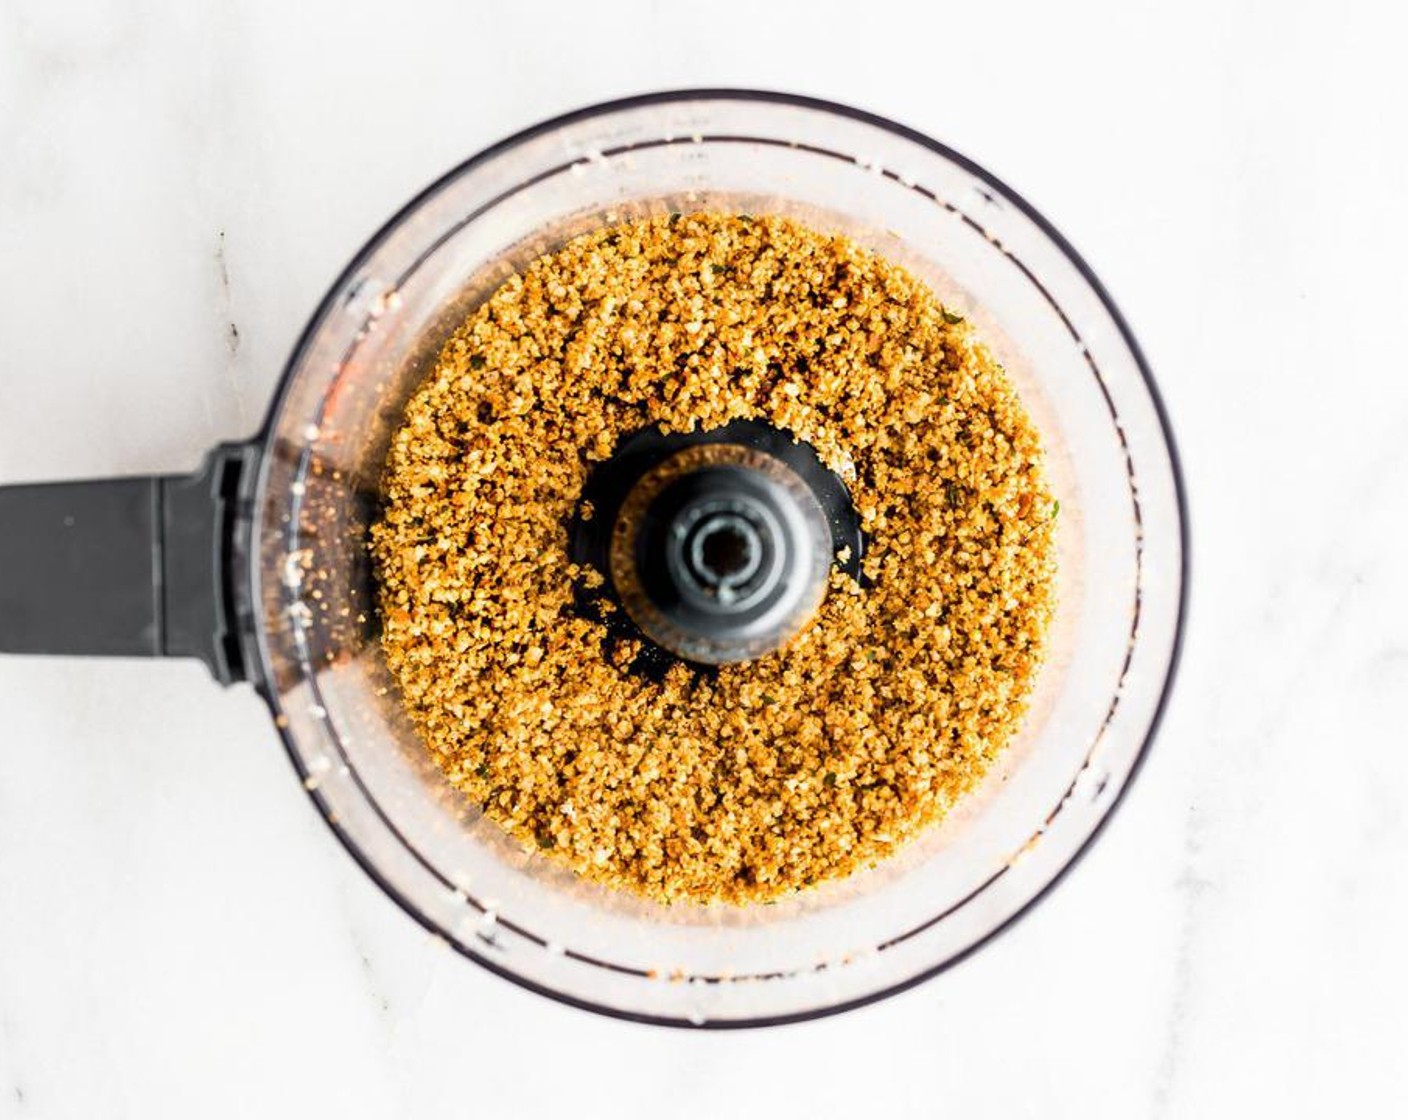 step 4 Add in your Garlic Powder (1/2 tsp), Smoked Paprika (1 tsp), Salt (to taste), Ground Black Pepper (to taste), leaves from Fresh Oregano (1 sprig), Fresh Ginger (1 pinch), and optional Ground Turmeric (1/4 tsp). Blend until a panko/meal crumb batter is formed.